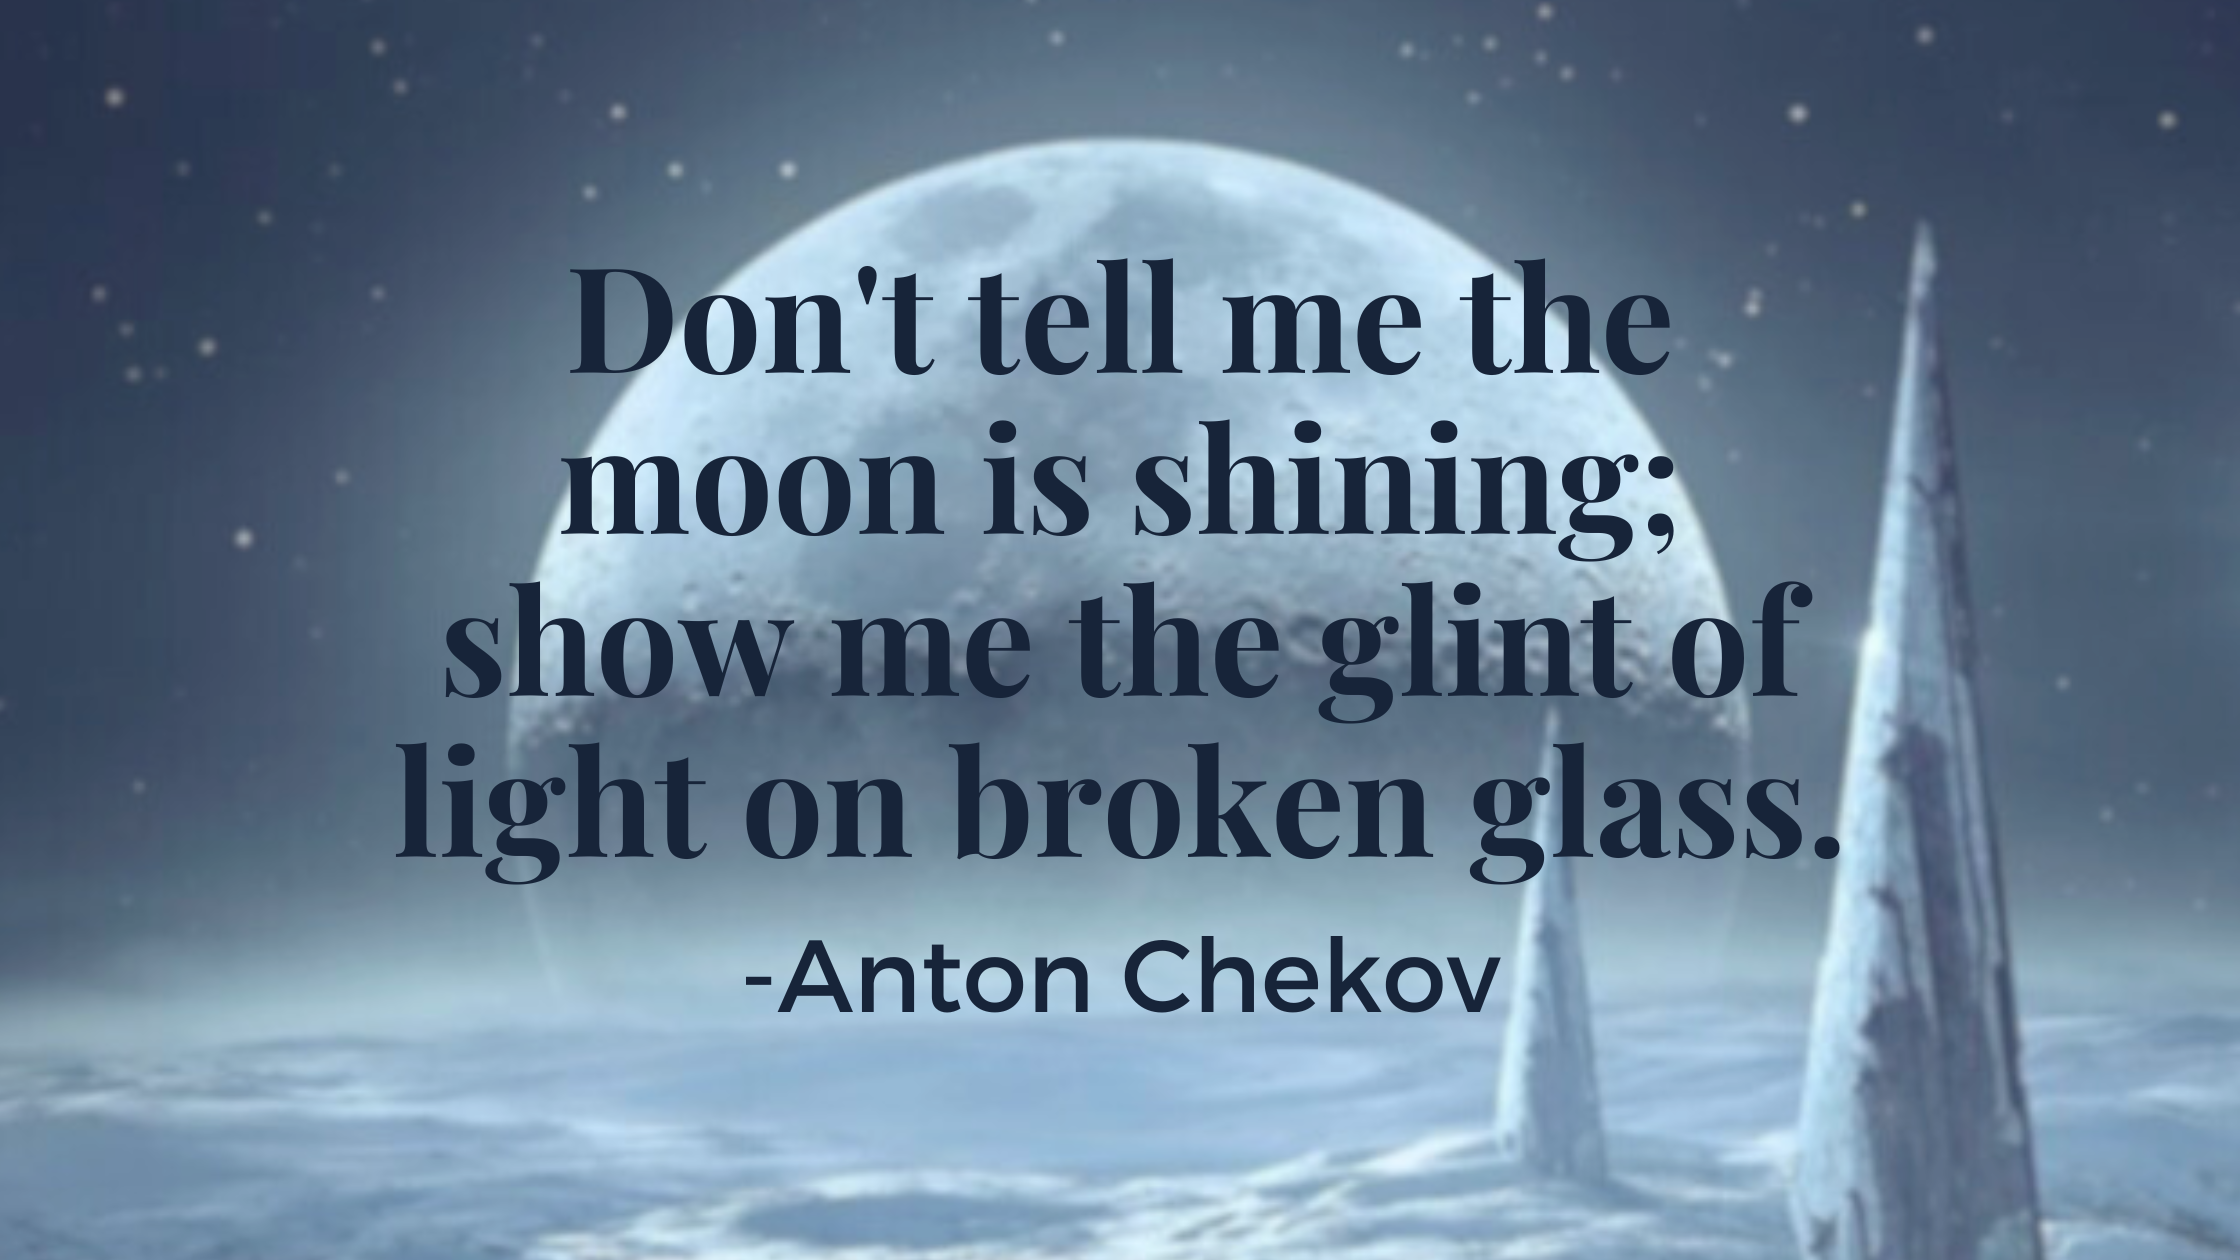 Quote from Anton Chekov